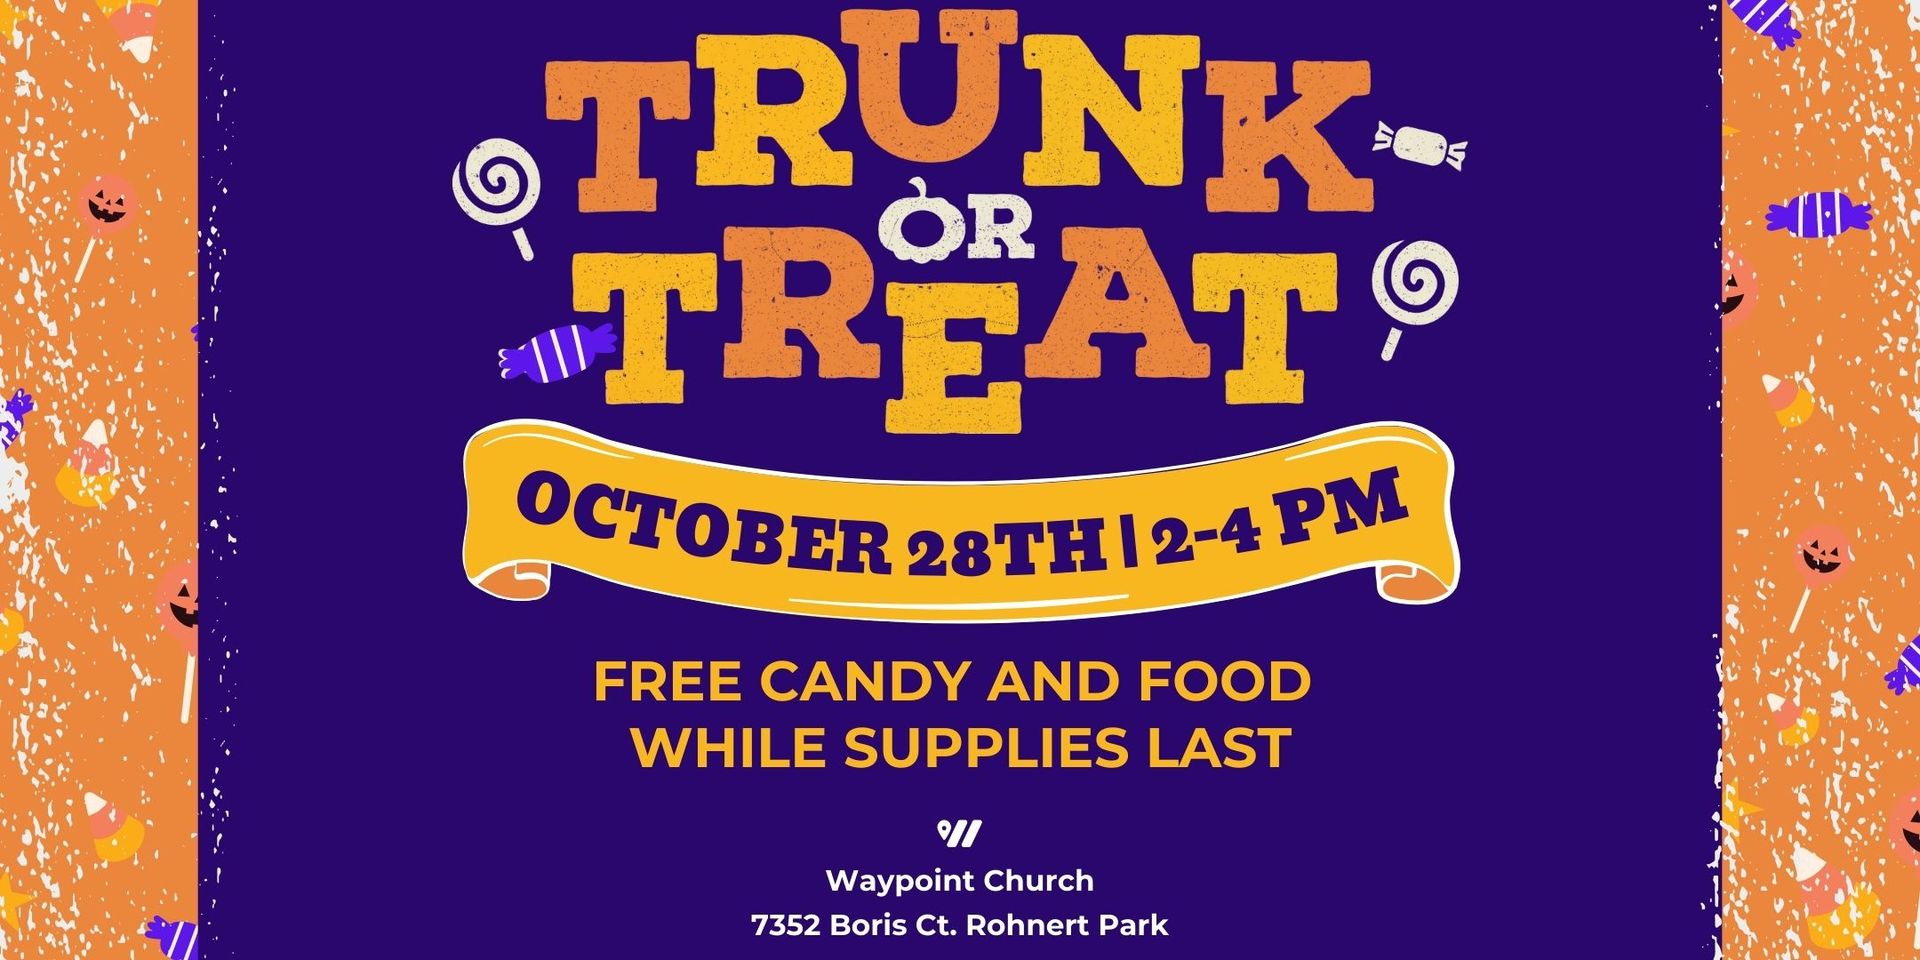 Trunk or Treat Promotional Image